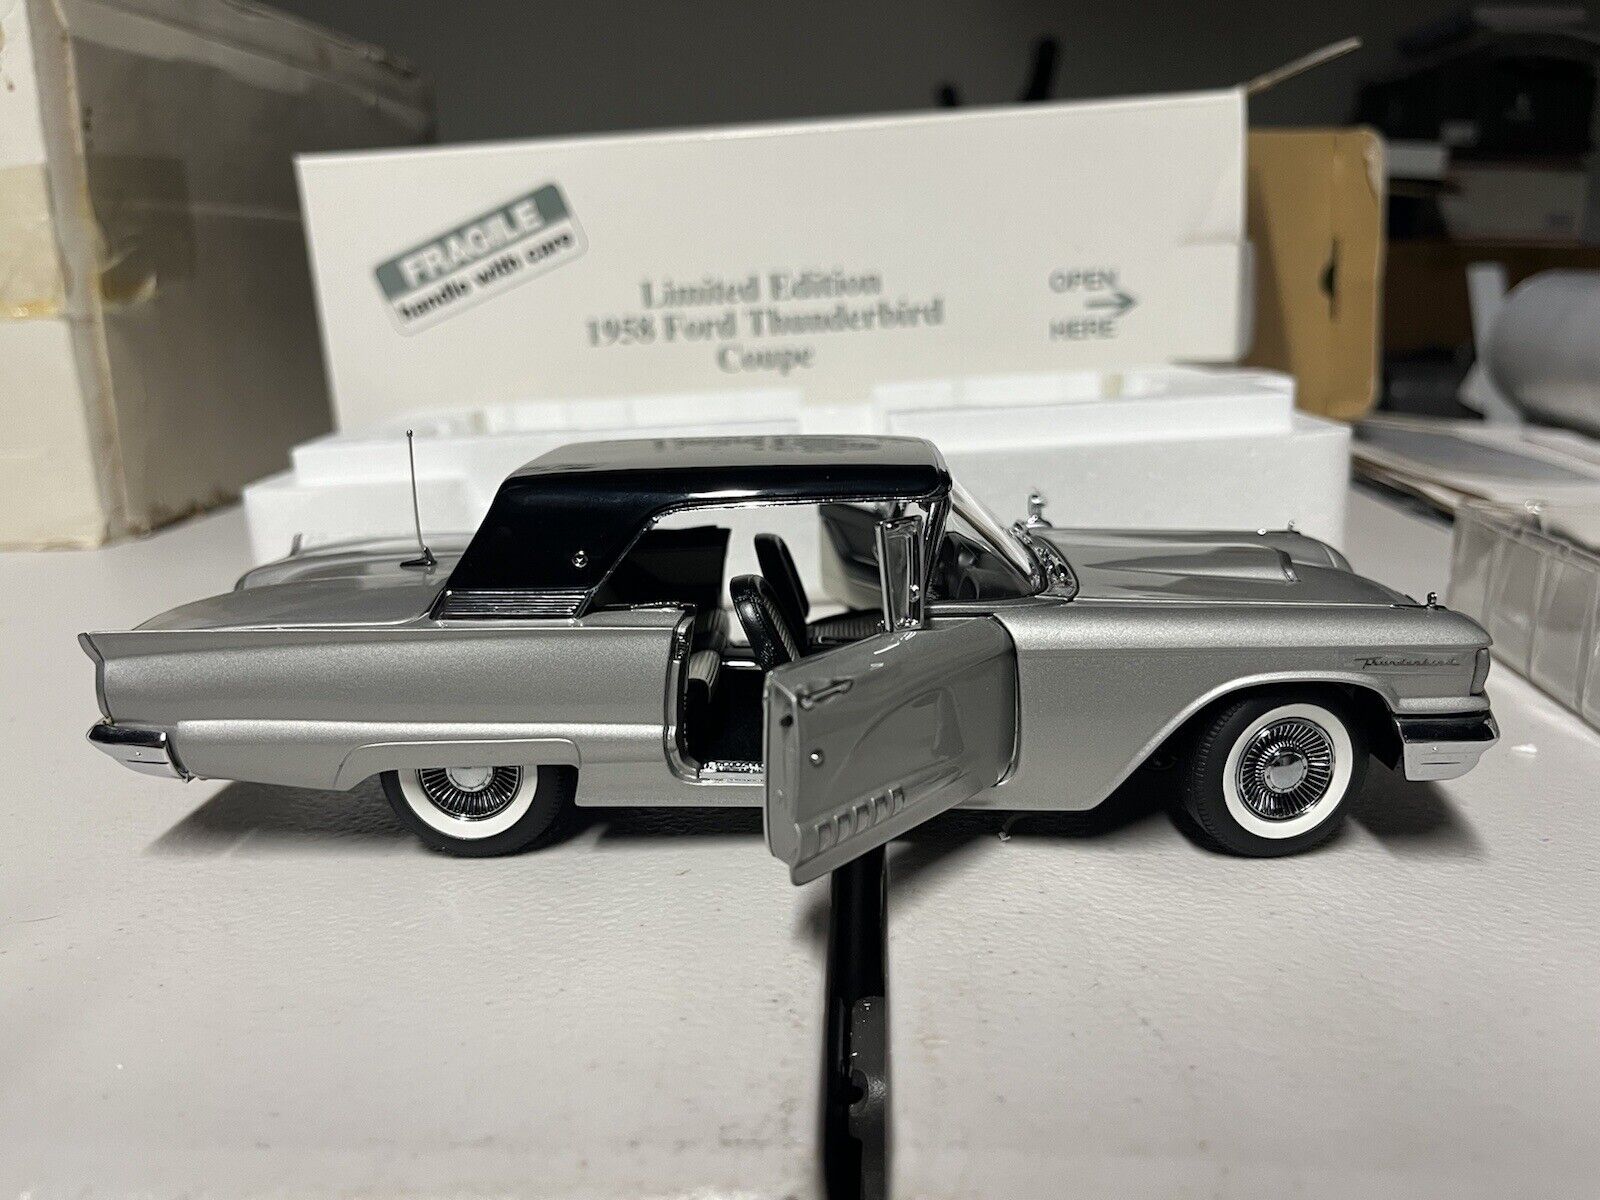 Danbury Mint Limited Edition 1958 Ford Thunderbird Coupe 2201